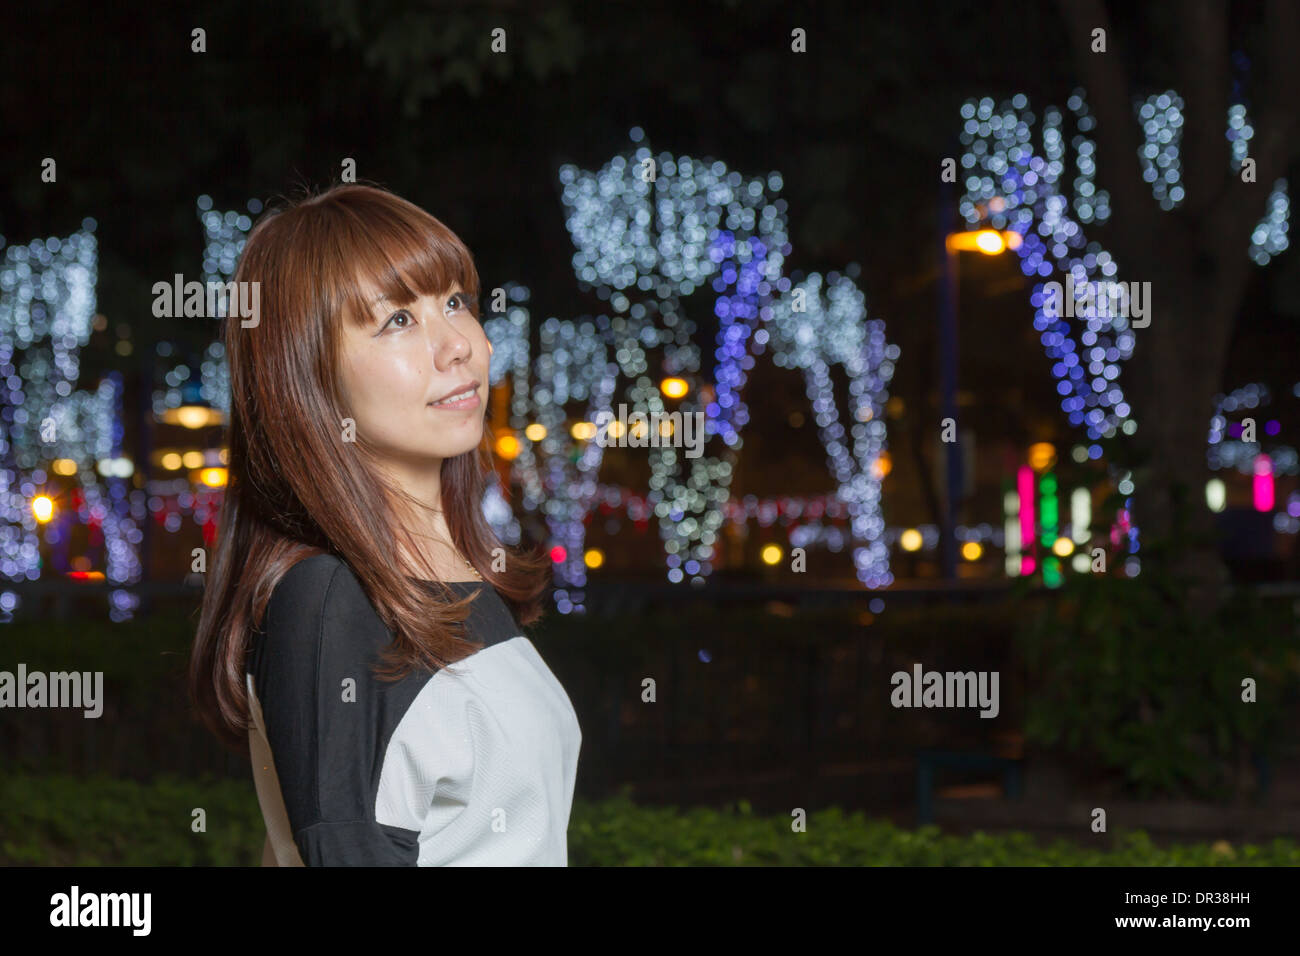 Japanese female outside with volorful lights in background Stock Photo